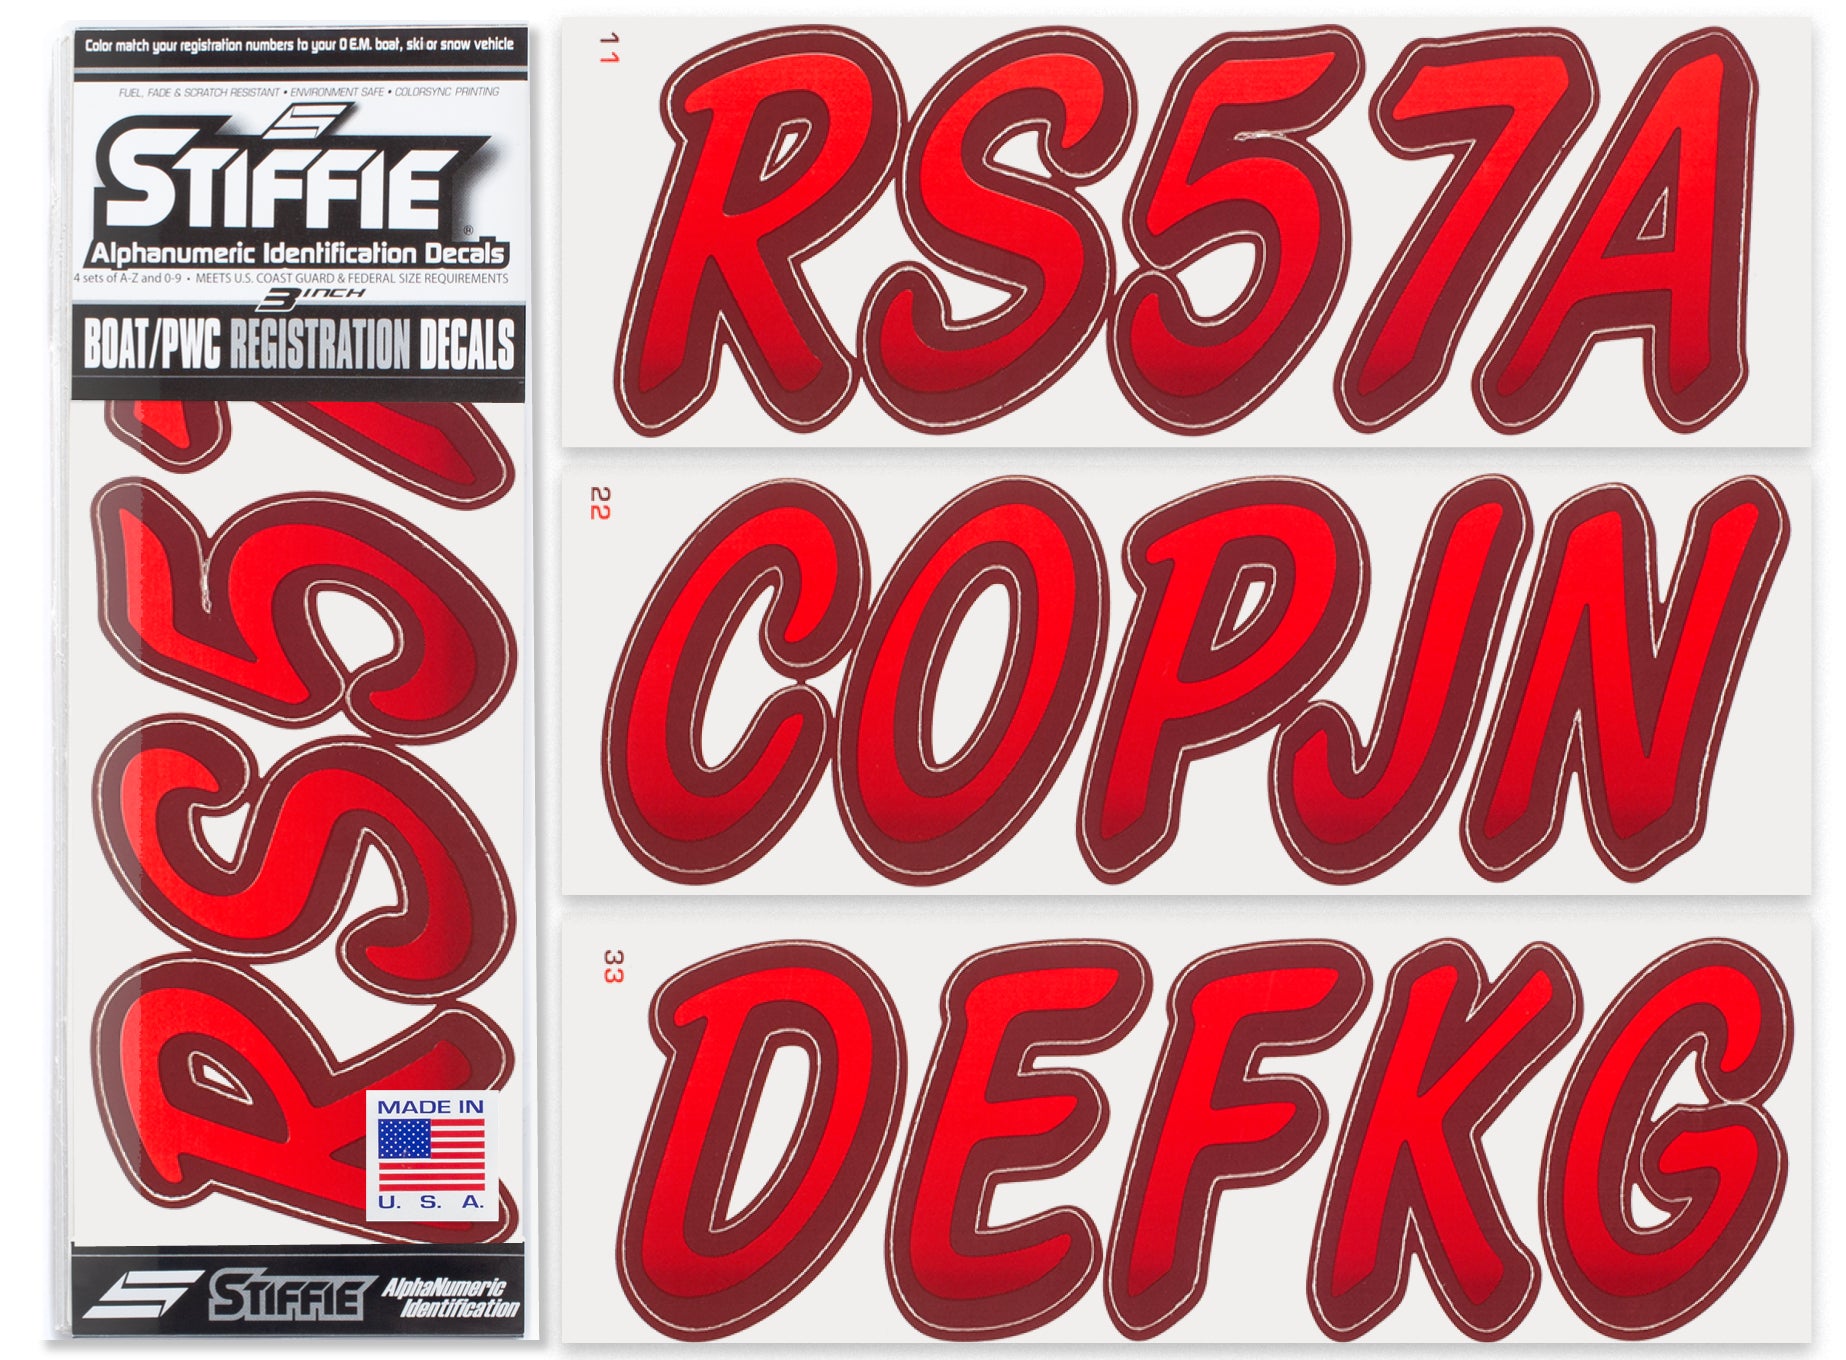 STIFFIE Whipline Red/Burgundy 3" Alpha-Numeric Registration Identification Numbers Stickers Decals for Boats & Personal Watercraft